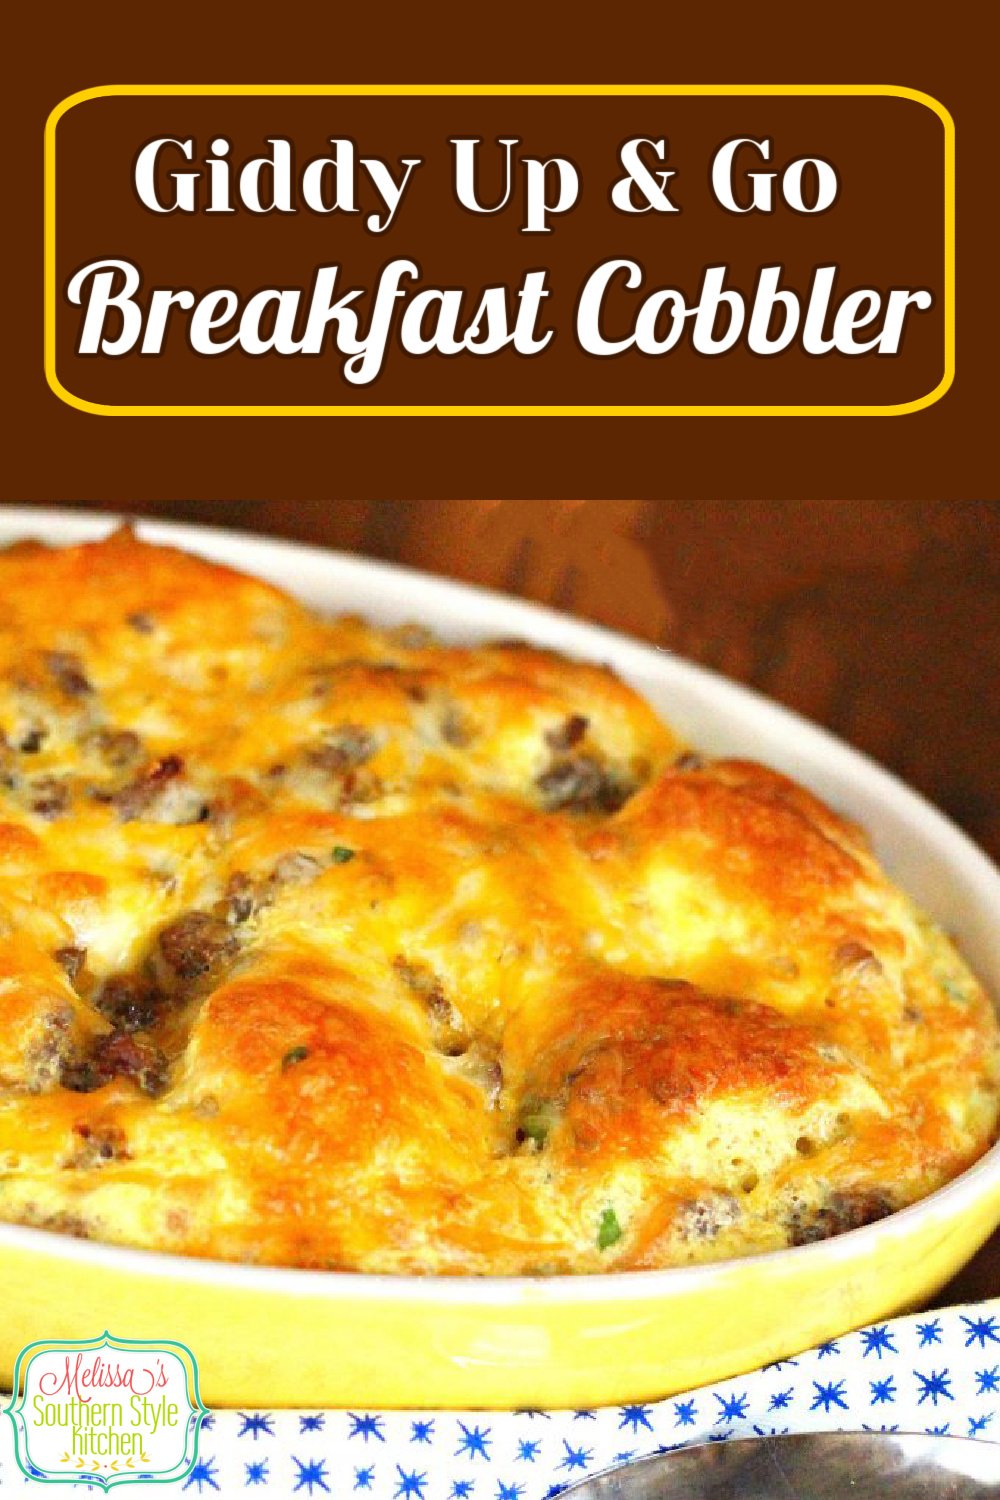 Start your day with this delicious Giddy Up And Go Breakfast Cobbler #breakfastcobbler #breakfast #cobblerrecipes #eggs #biscuits #sausage #brunch #holidaybrunch #southernfood #southernrecipes #biscuits #breakfastcasseroles via @melissasssk